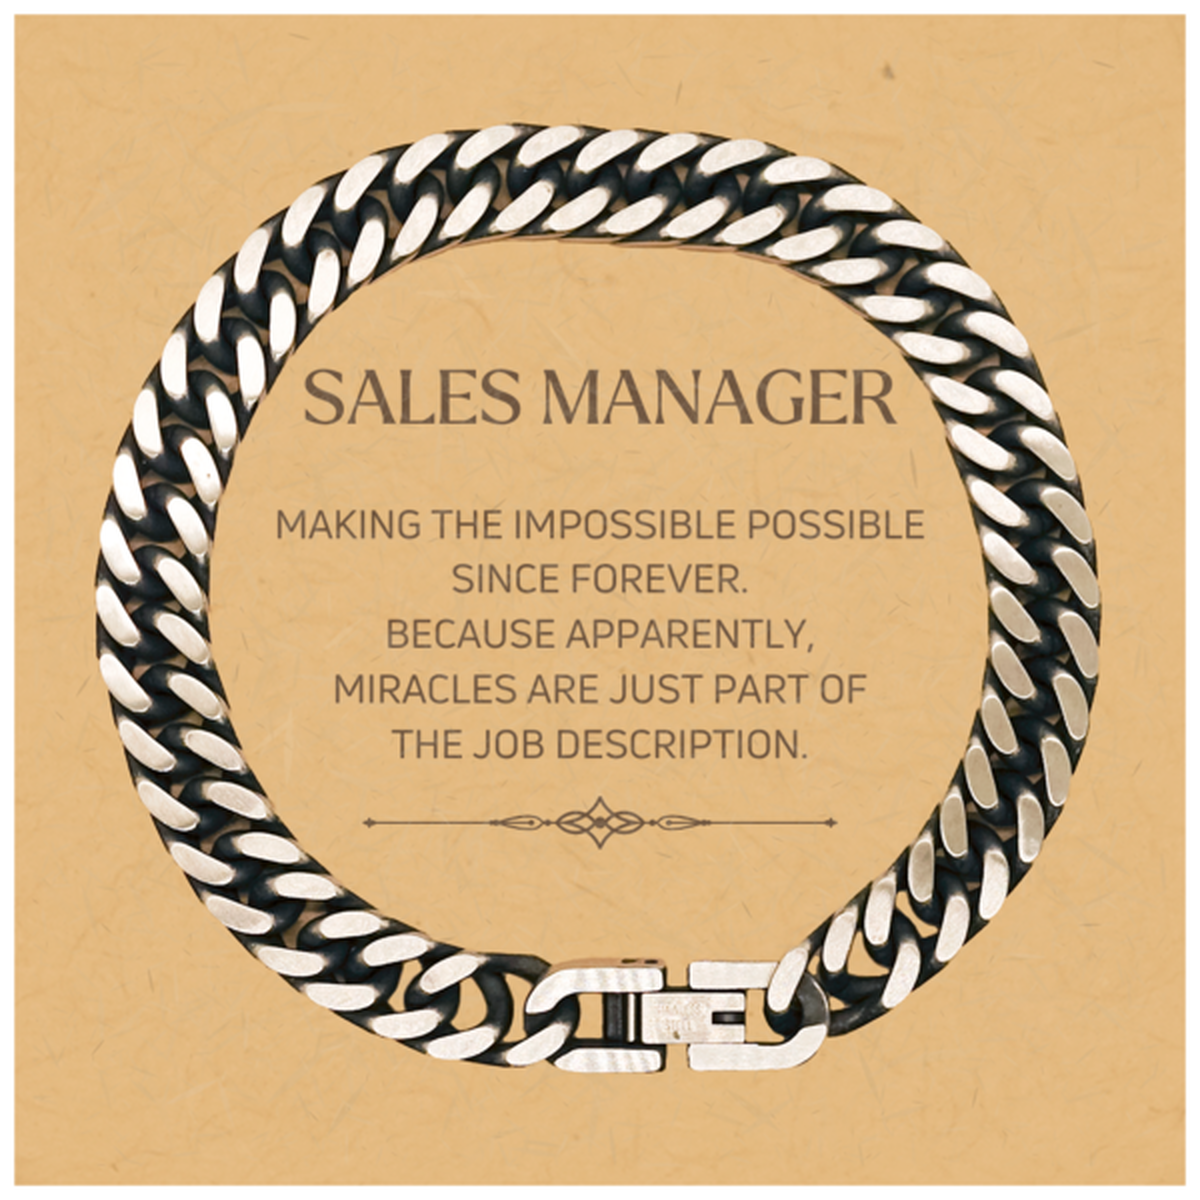 Funny Sales Manager Gifts, Miracles are just part of the job description, Inspirational Birthday Christmas Cuban Link Chain Bracelet For Sales Manager, Men, Women, Coworkers, Friends, Boss